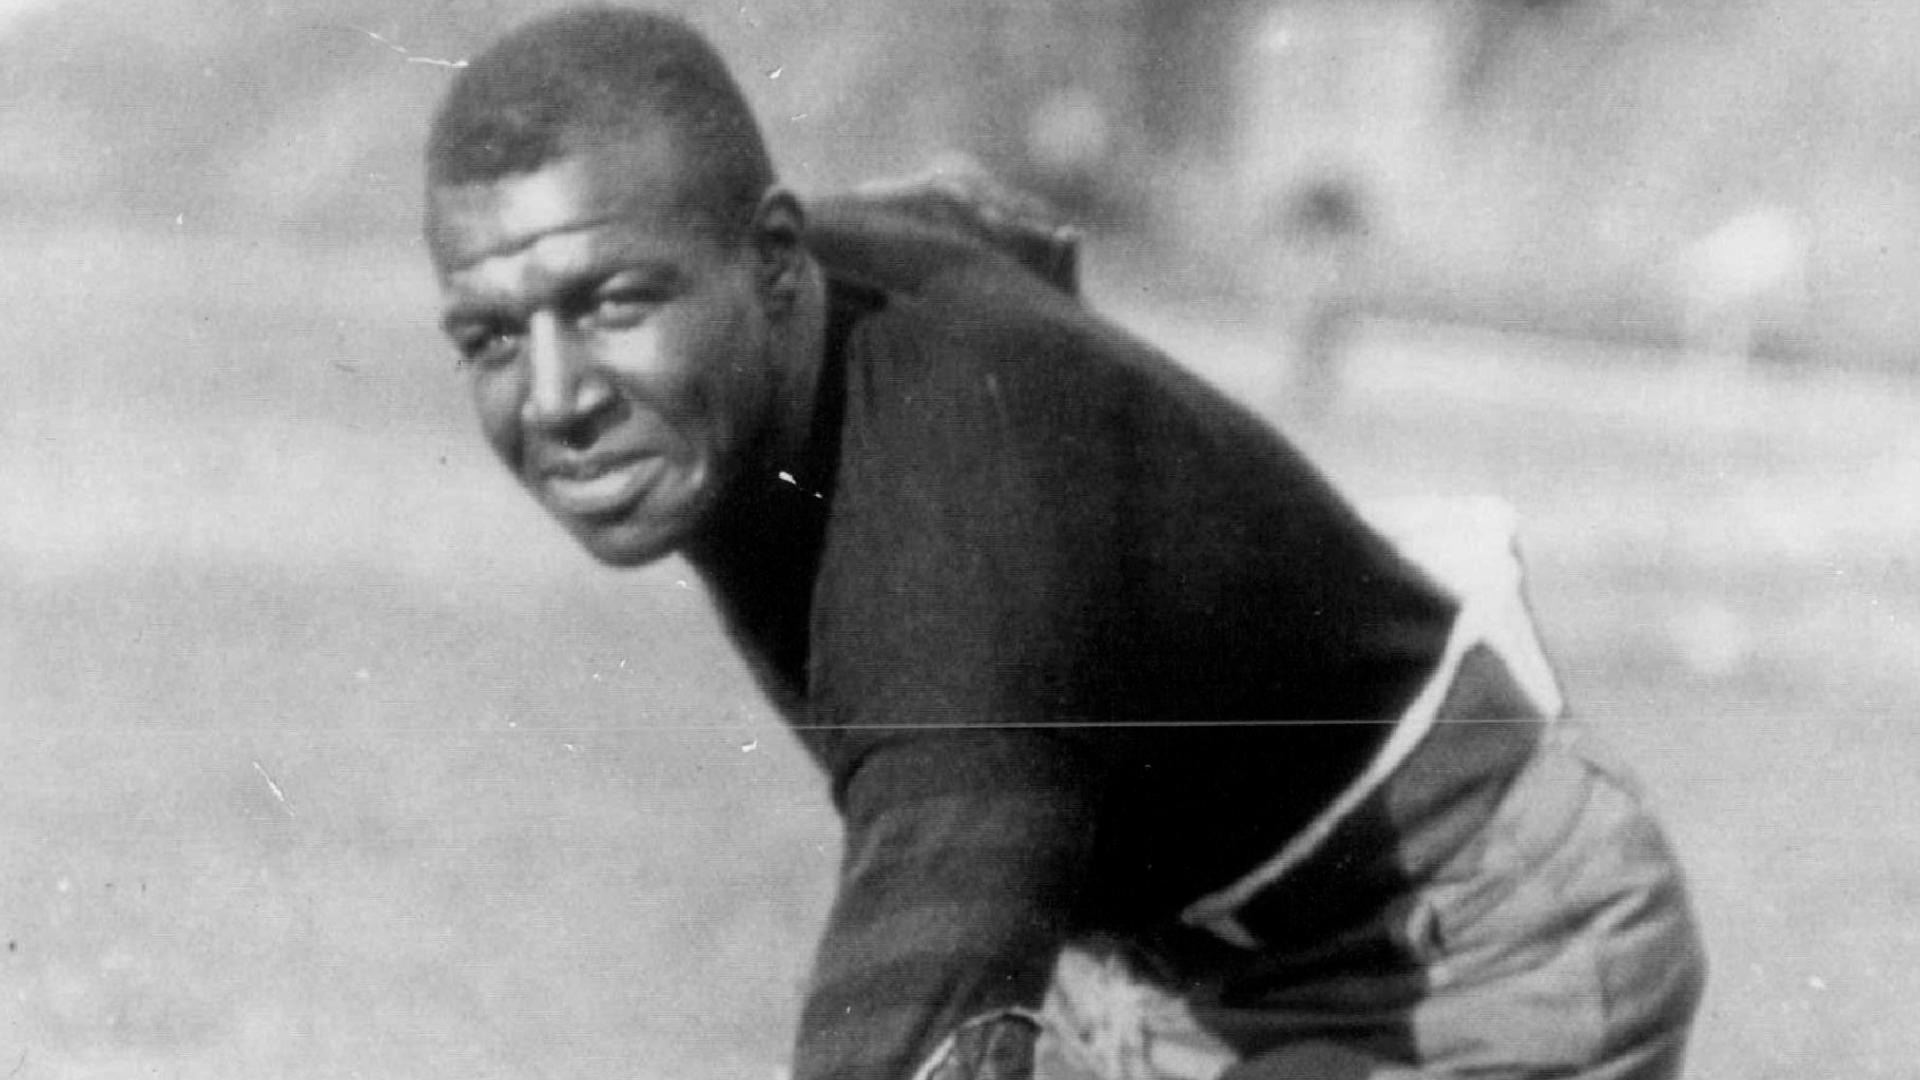 The Board of Regents wants to name Kinnick Stadium's surface after Duke Slater, the NFL's first Black lineman.